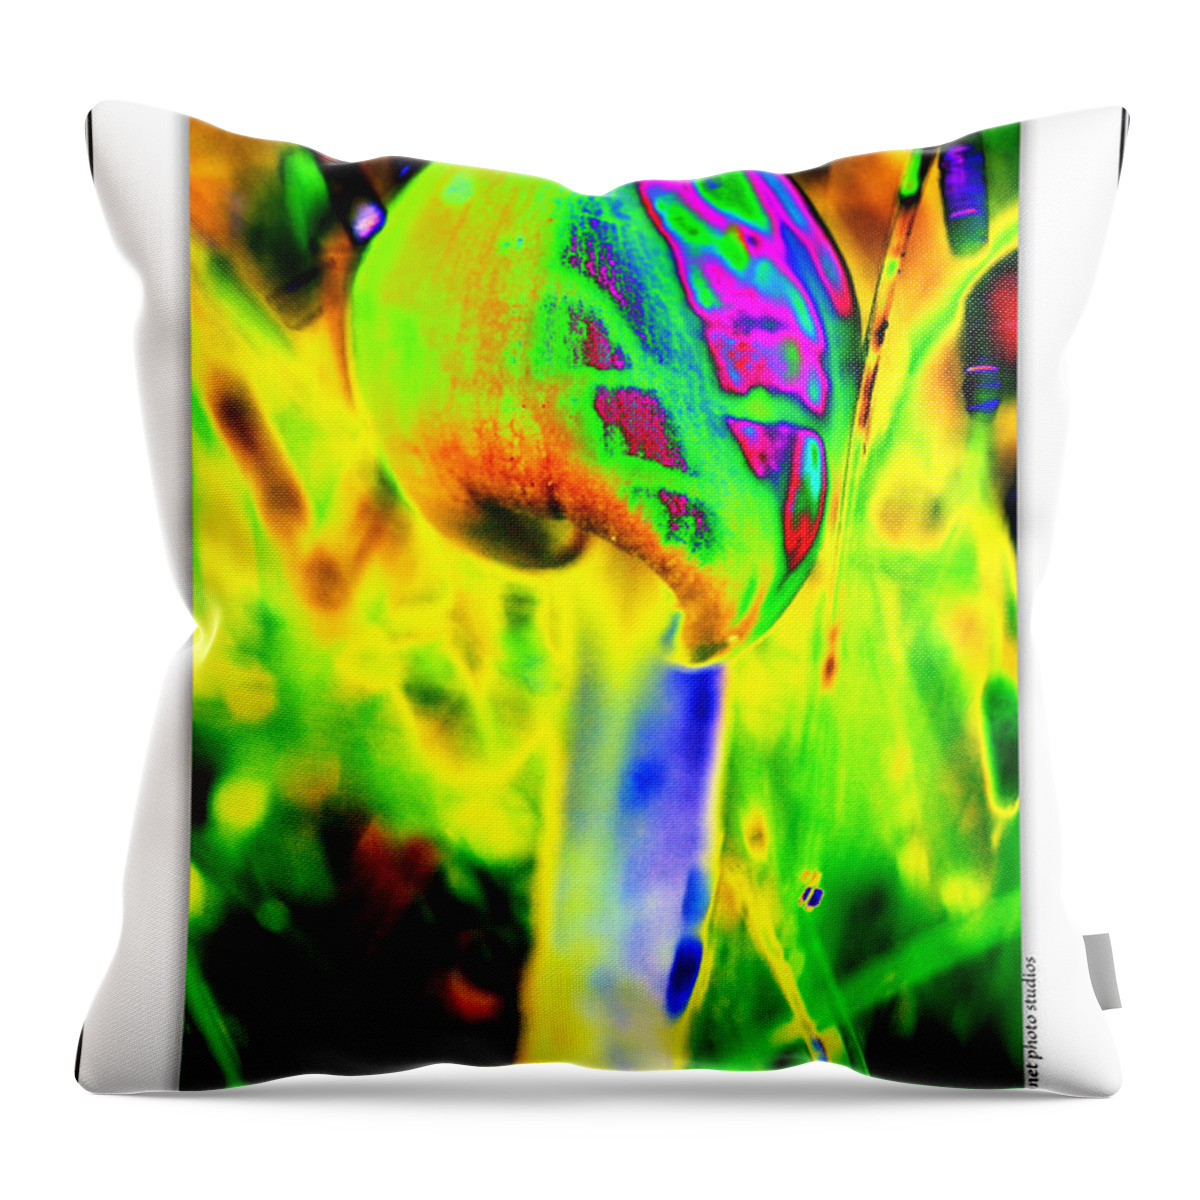 Psychedelic Mushroom Throw Pillow featuring the photograph Shroooms #1 by Onyonet Photo studios